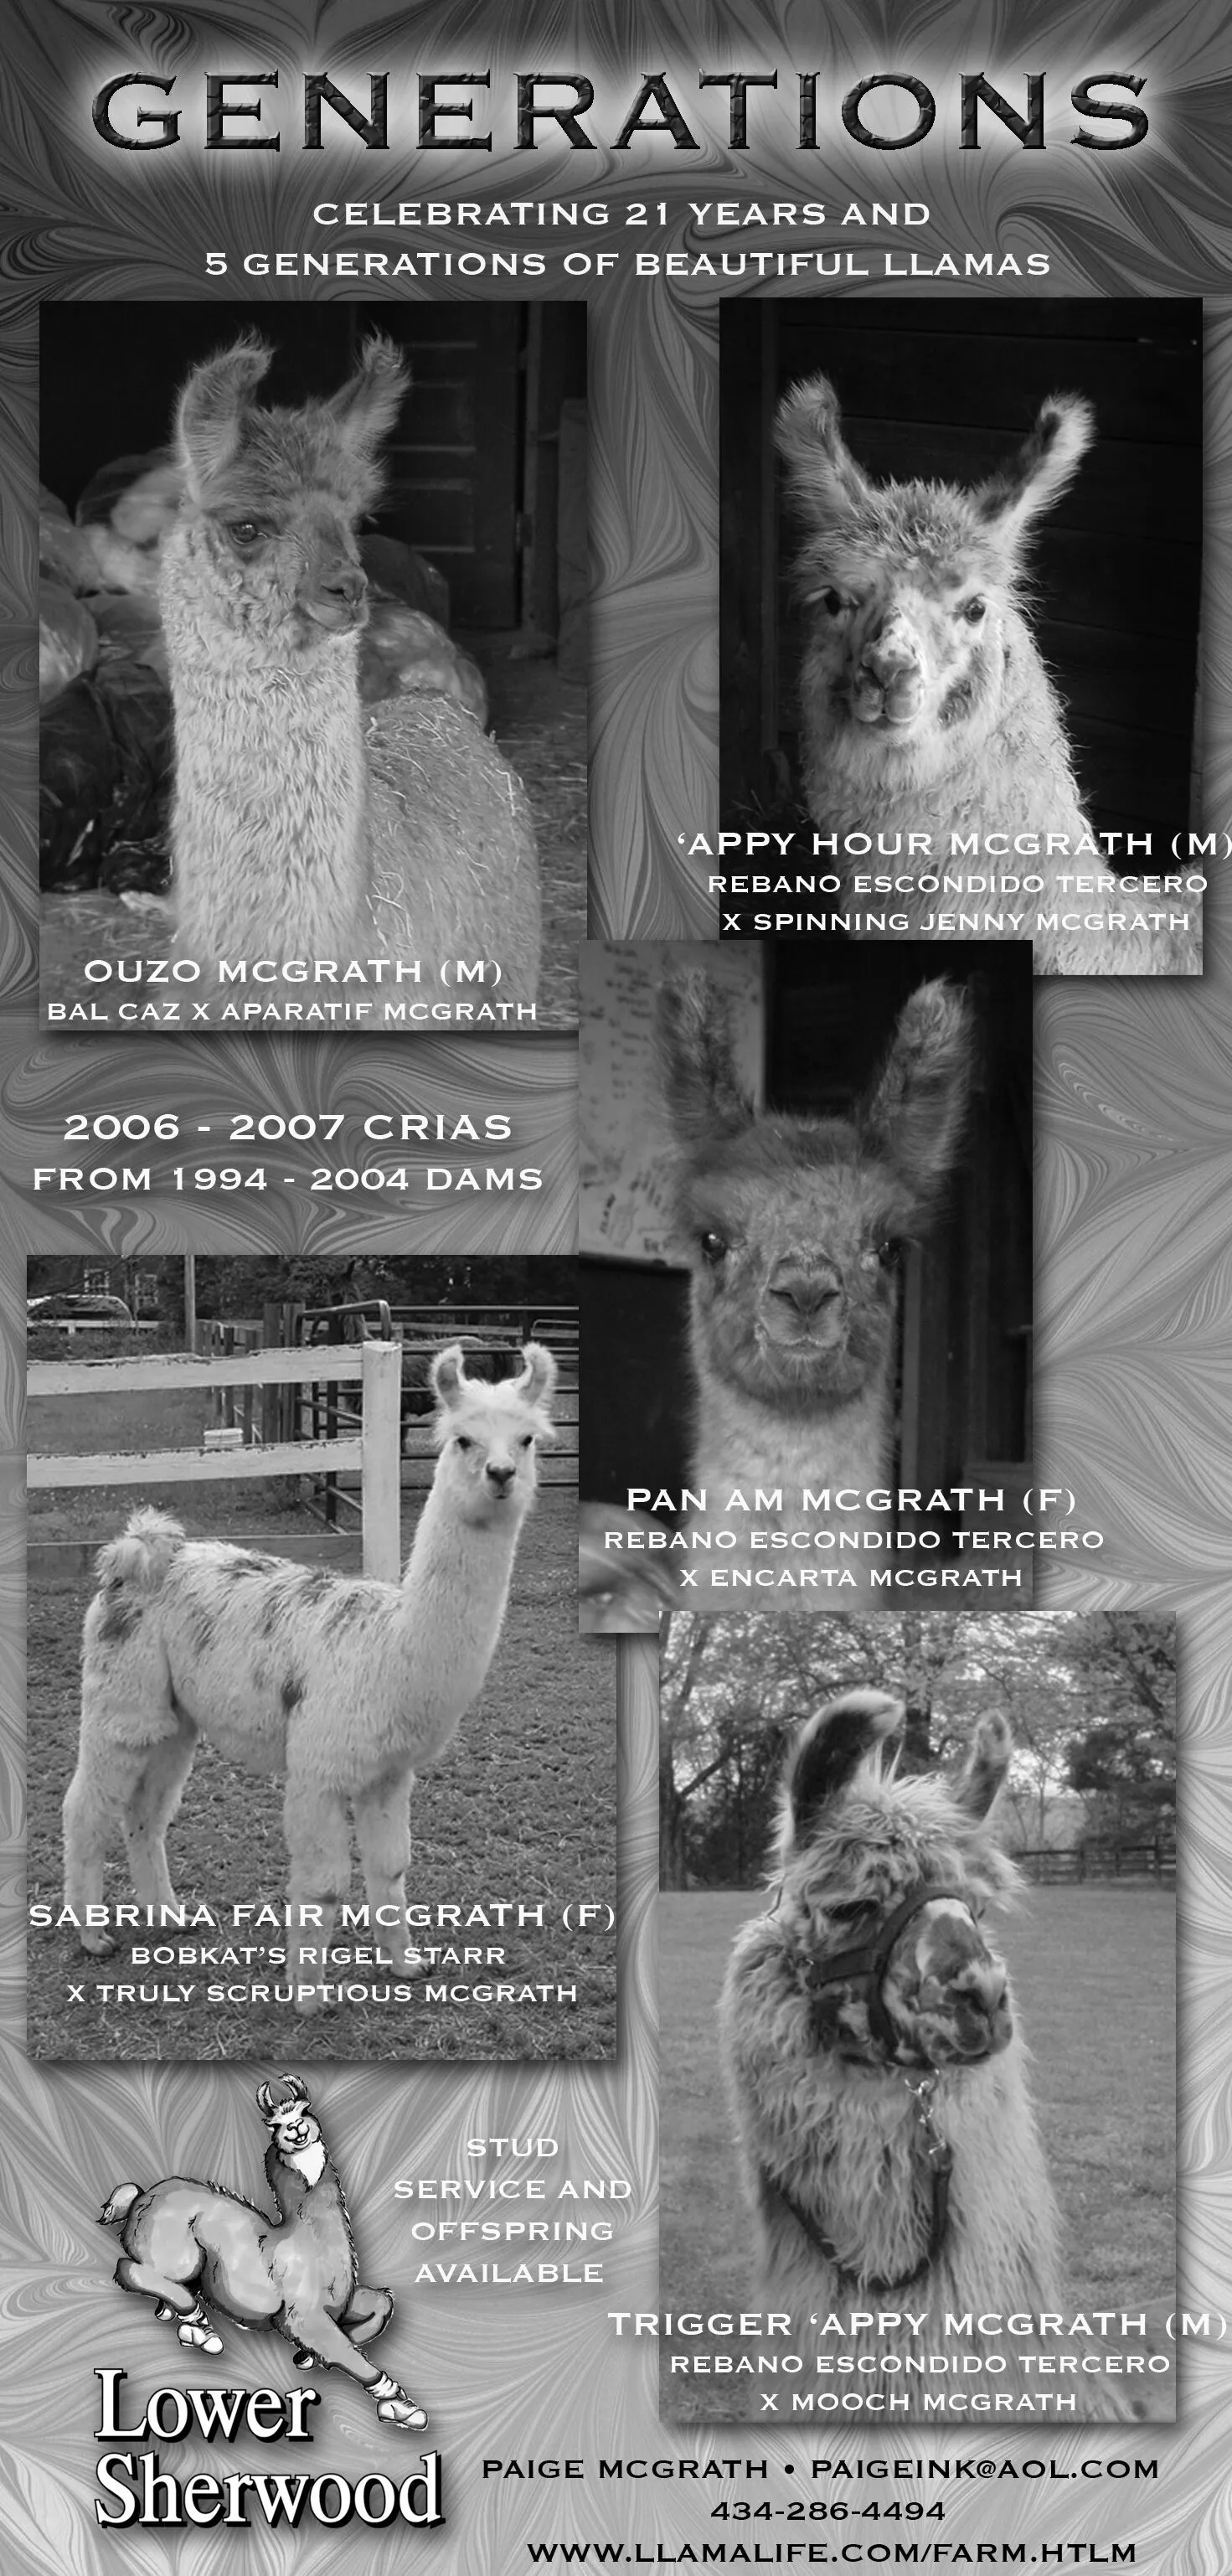 An advertisement for llamas named Ouzo, Appy Hour, Pan Am, Sabrina Fair, and Trigger Appy